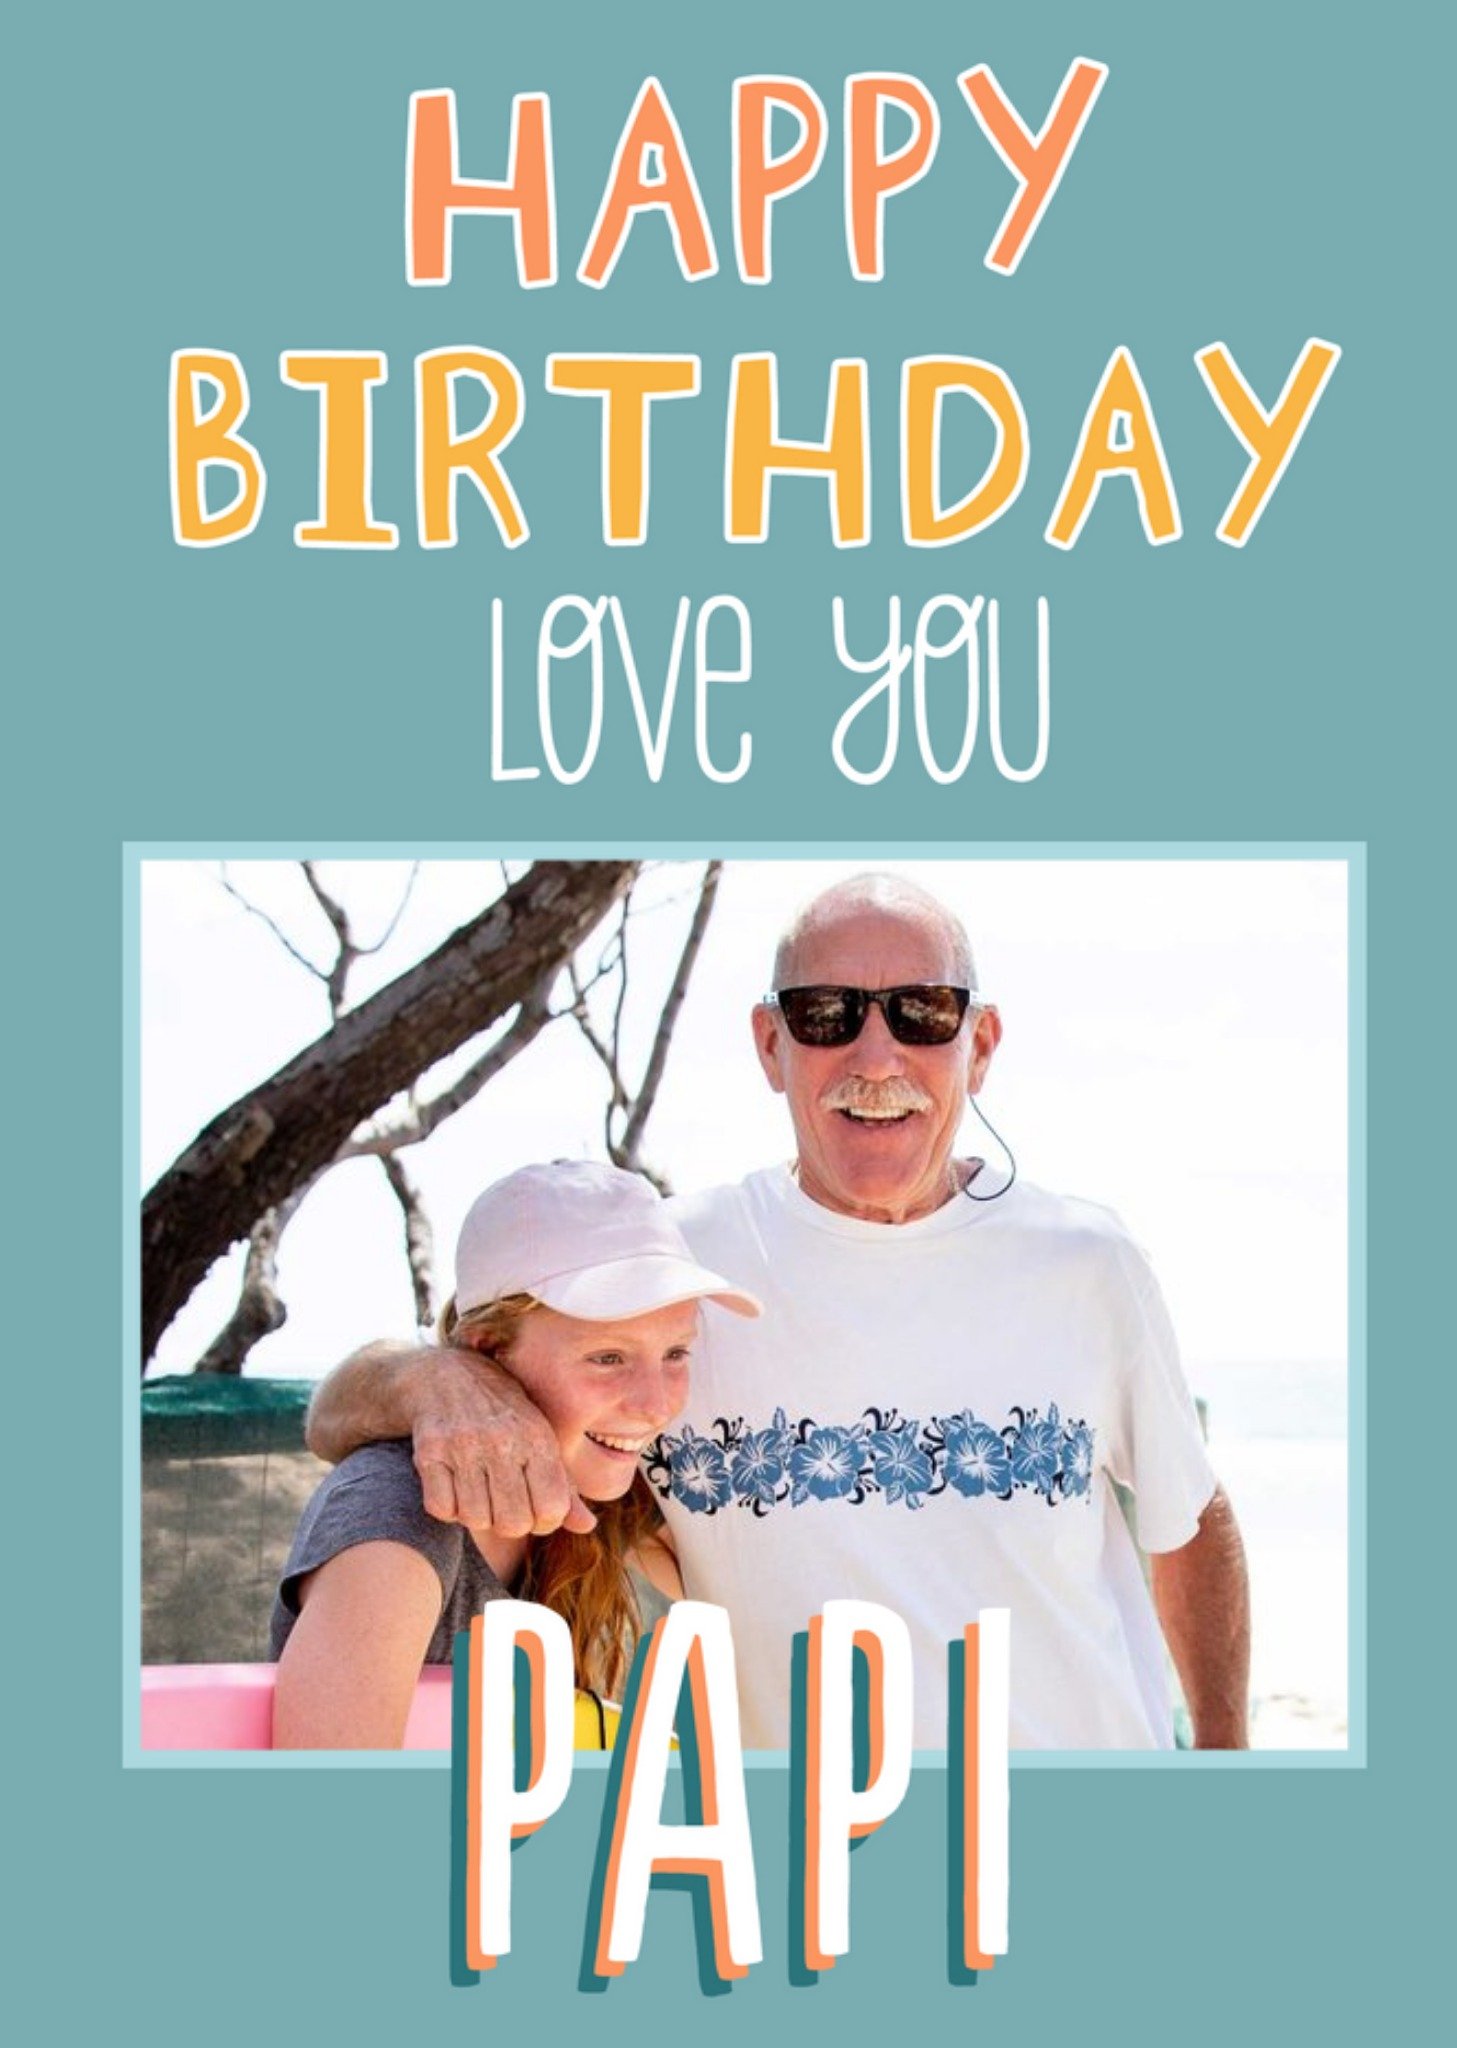 Moonpig Photo Frame On A Teal Background Wth Fun And Vibrant Text Grandad's Photo Upload Birthday Ca